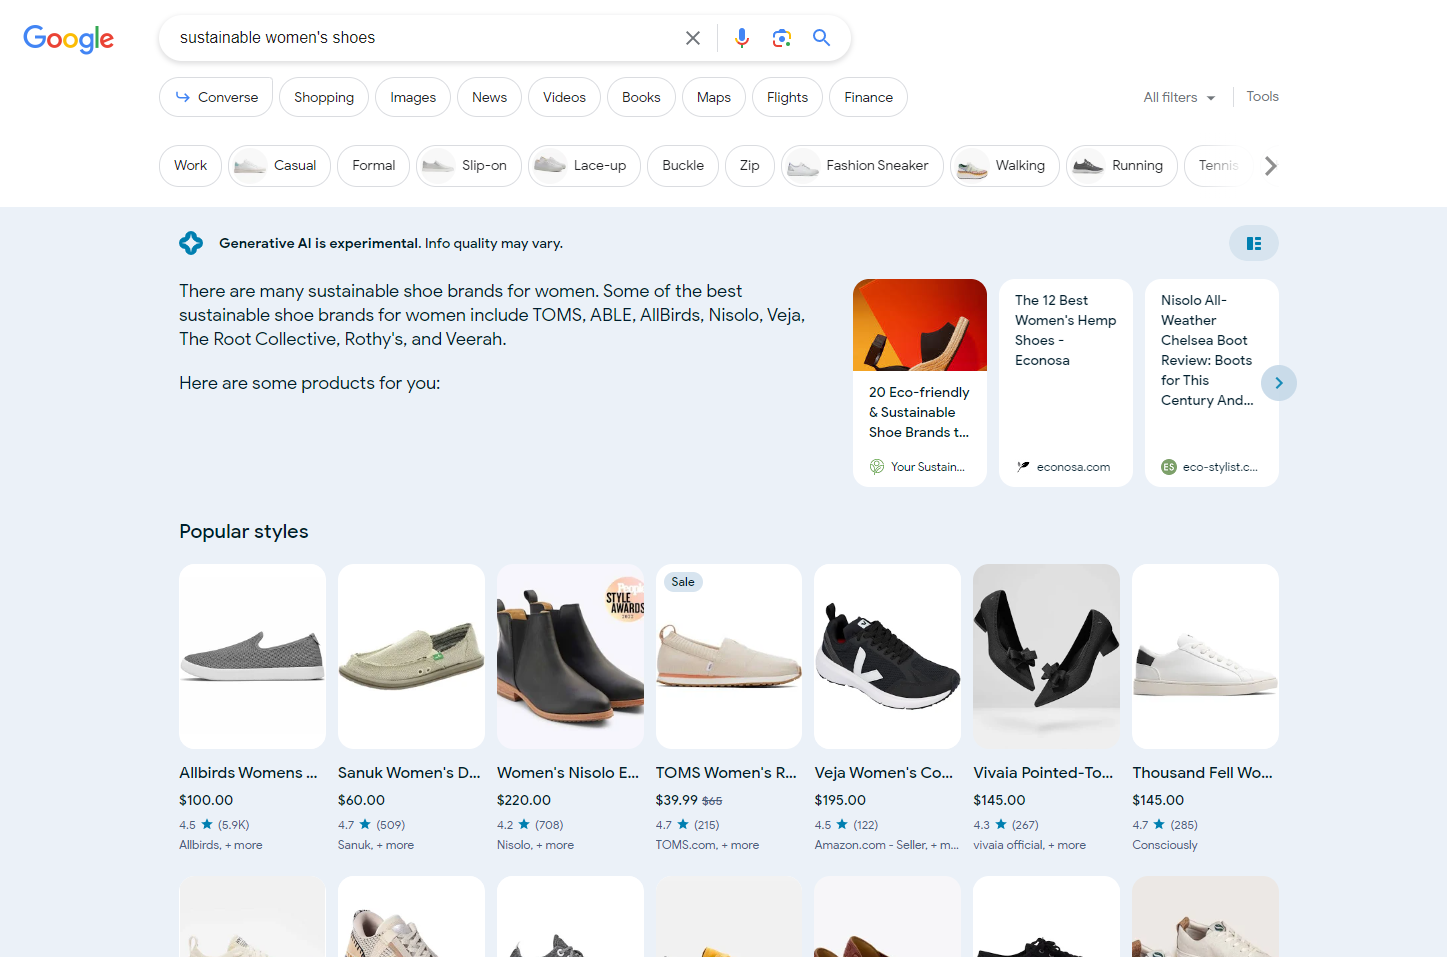 a desktop search for ‘sustainable women’s shoes’ shows a generative AI response with a blurb about some popular brands and a carousel of links next to that blurb seemingly where the response got its information